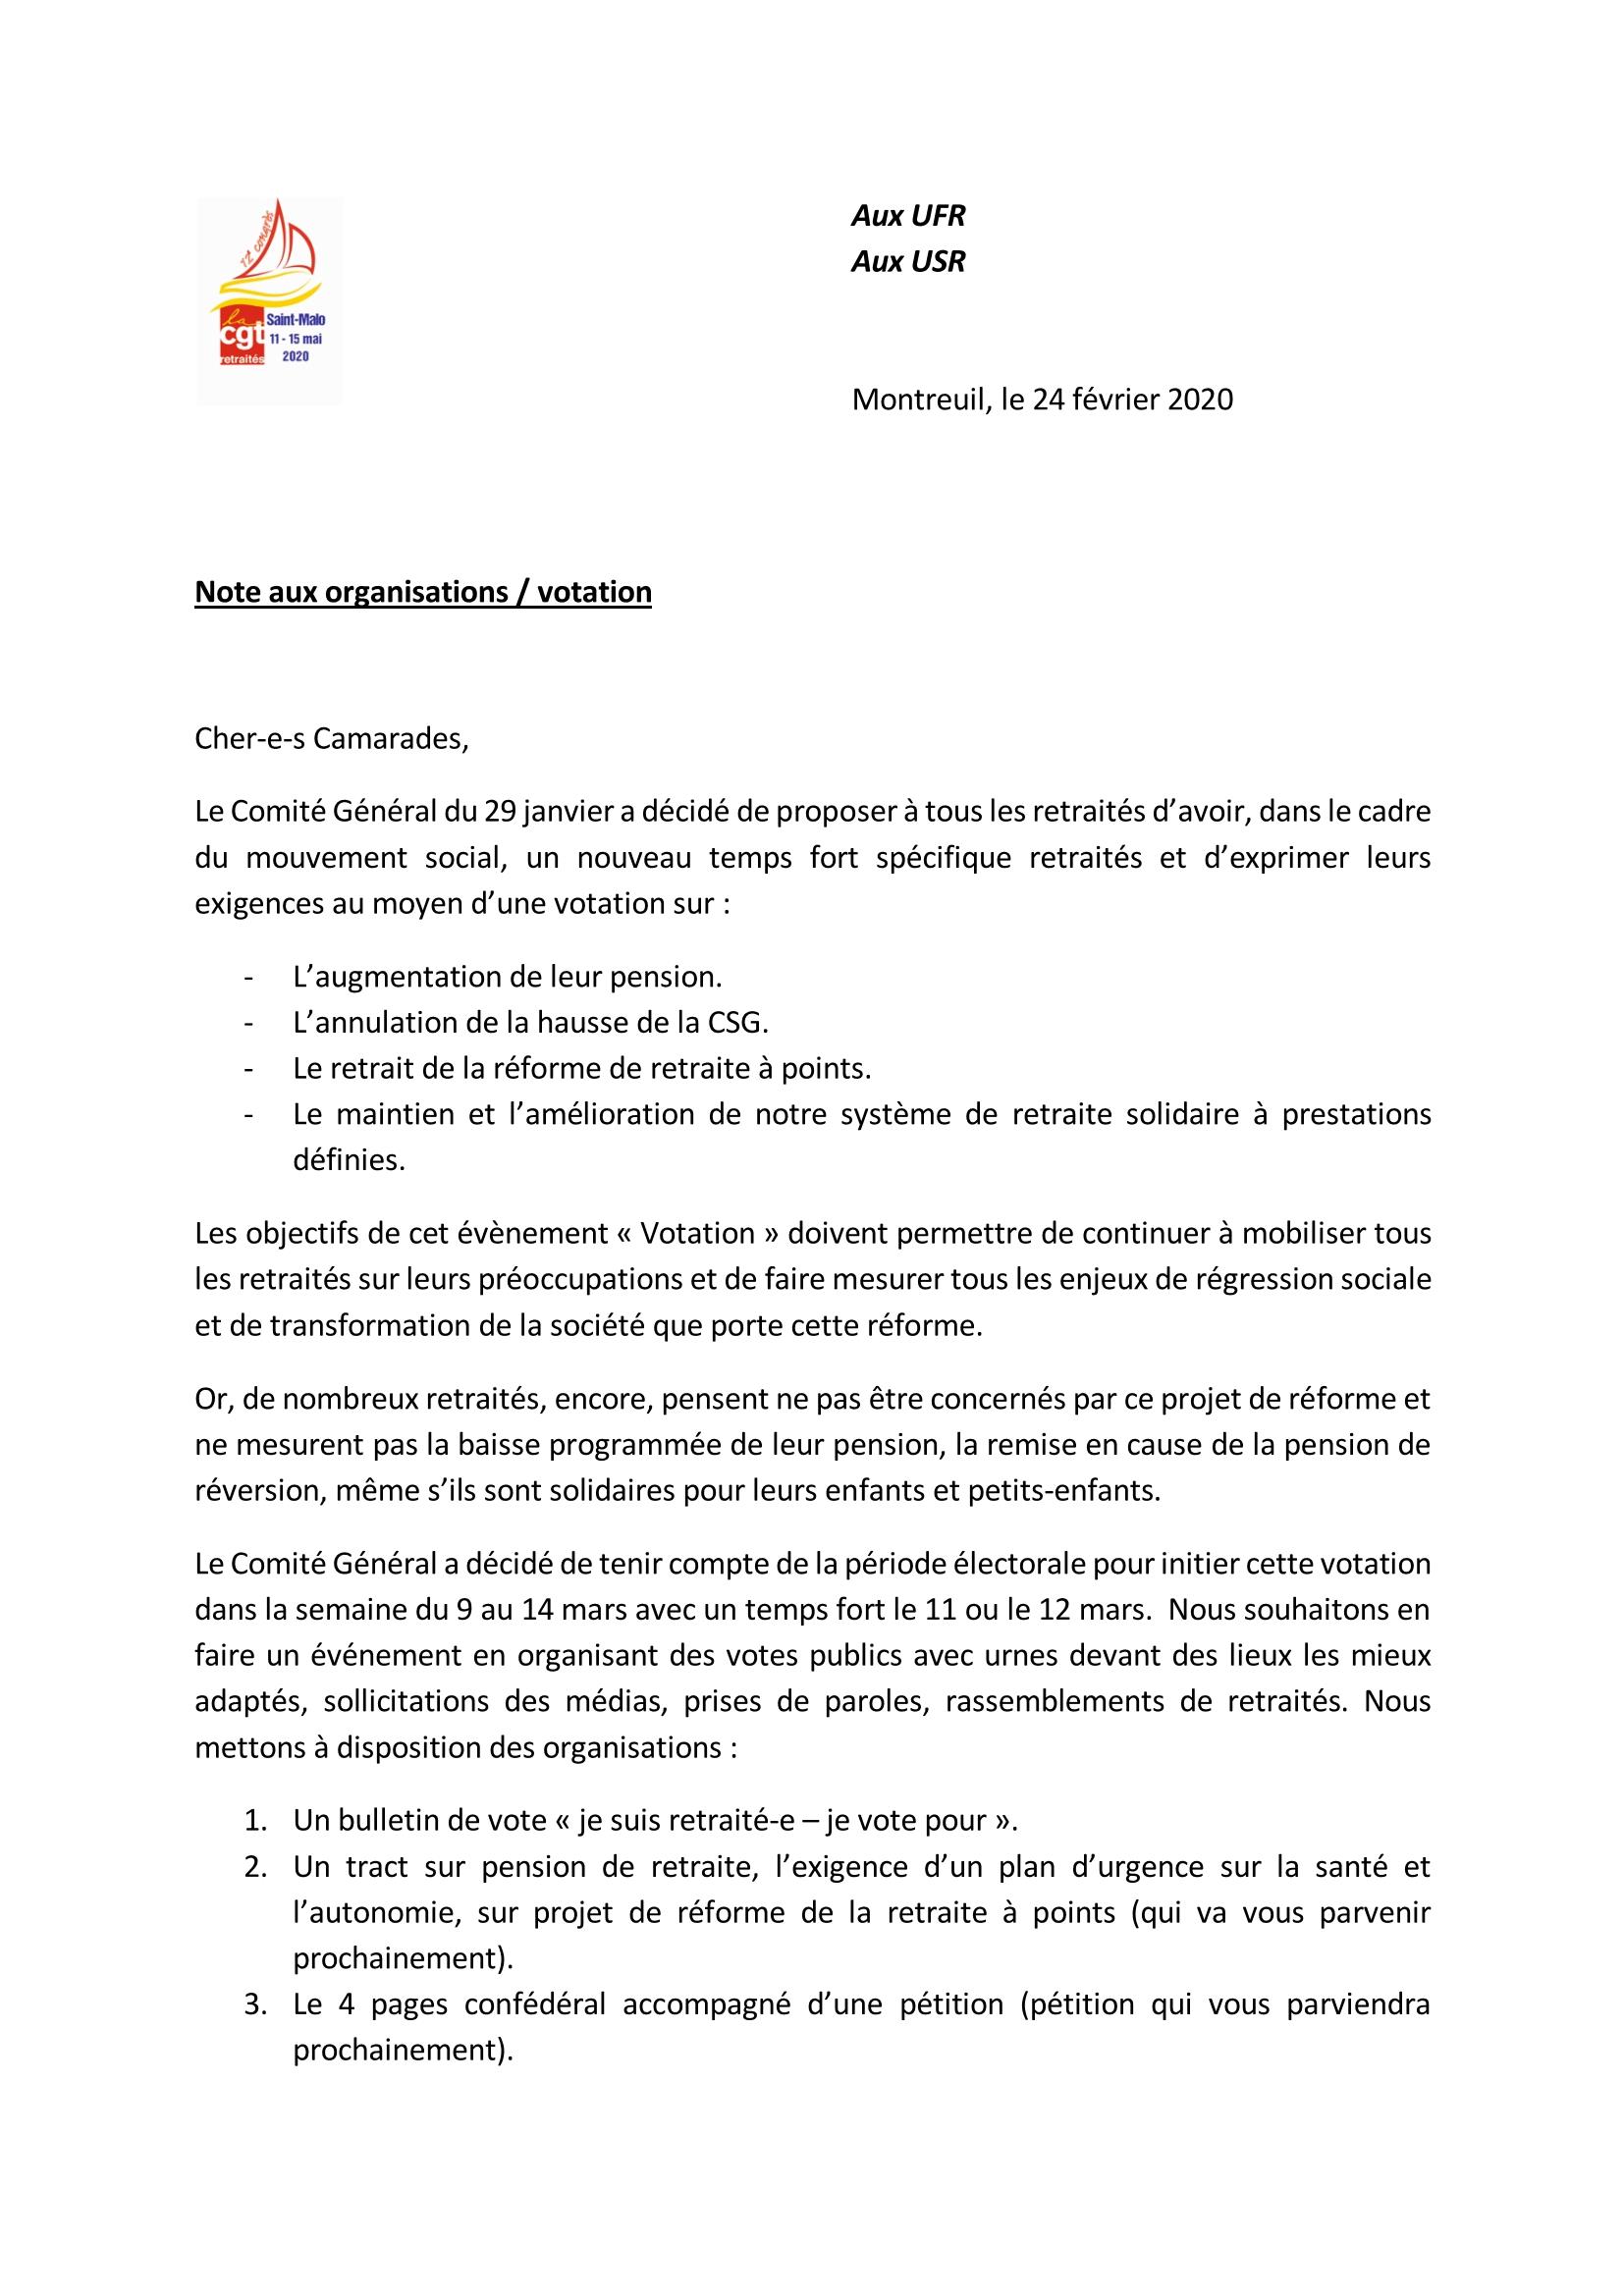 Note aux organisations votation 2020 Page 1